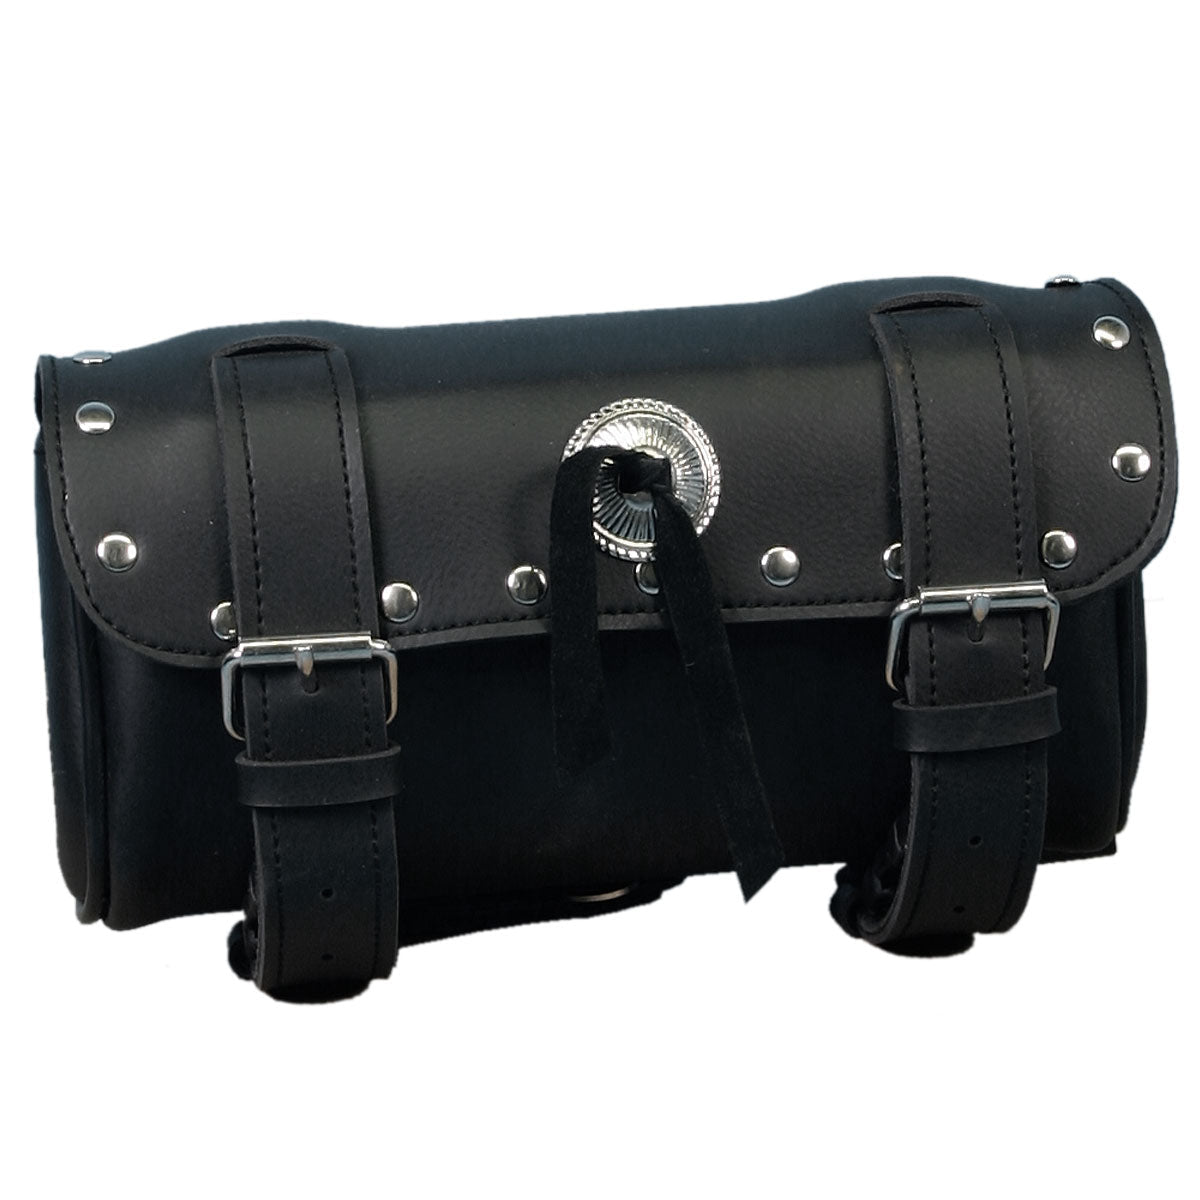 Hot Leathers PVC Motorcycle Tool Bag tbc1008